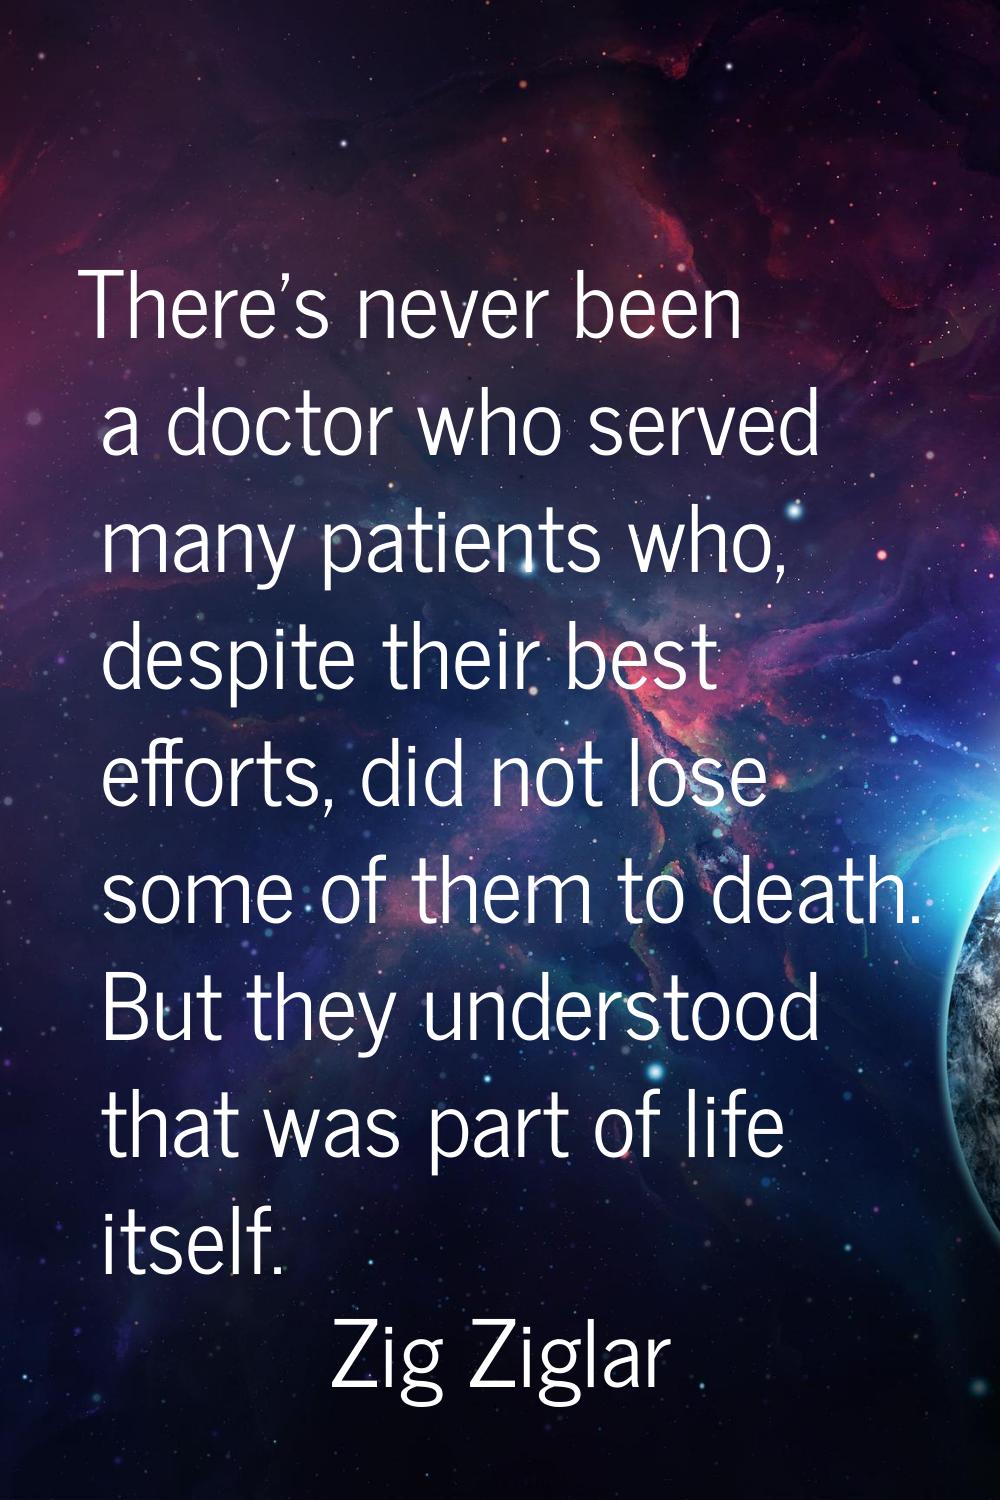 There's never been a doctor who served many patients who, despite their best efforts, did not lose 